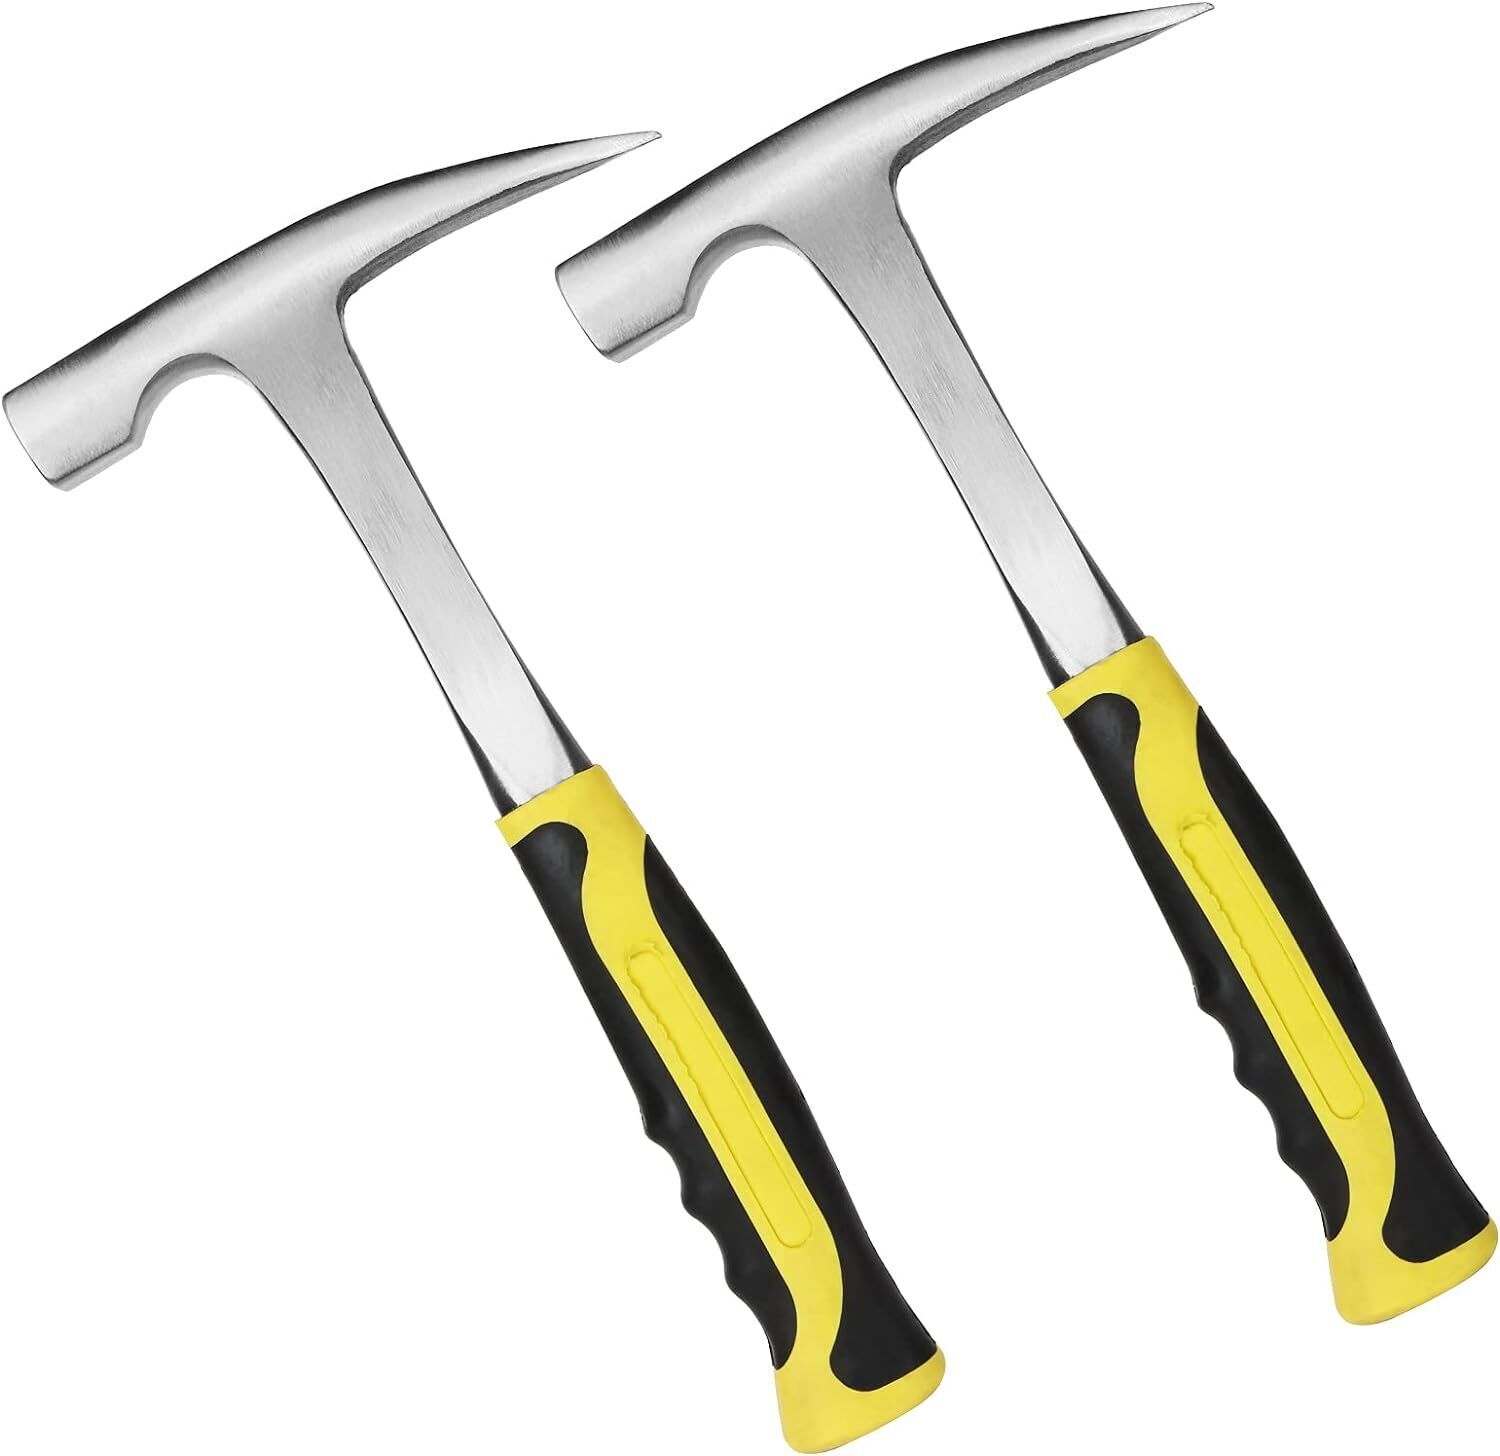 2 Pack Rock Pick Hammer With Non-Skid Handle, 12.8 Inch All inch, Yellow 